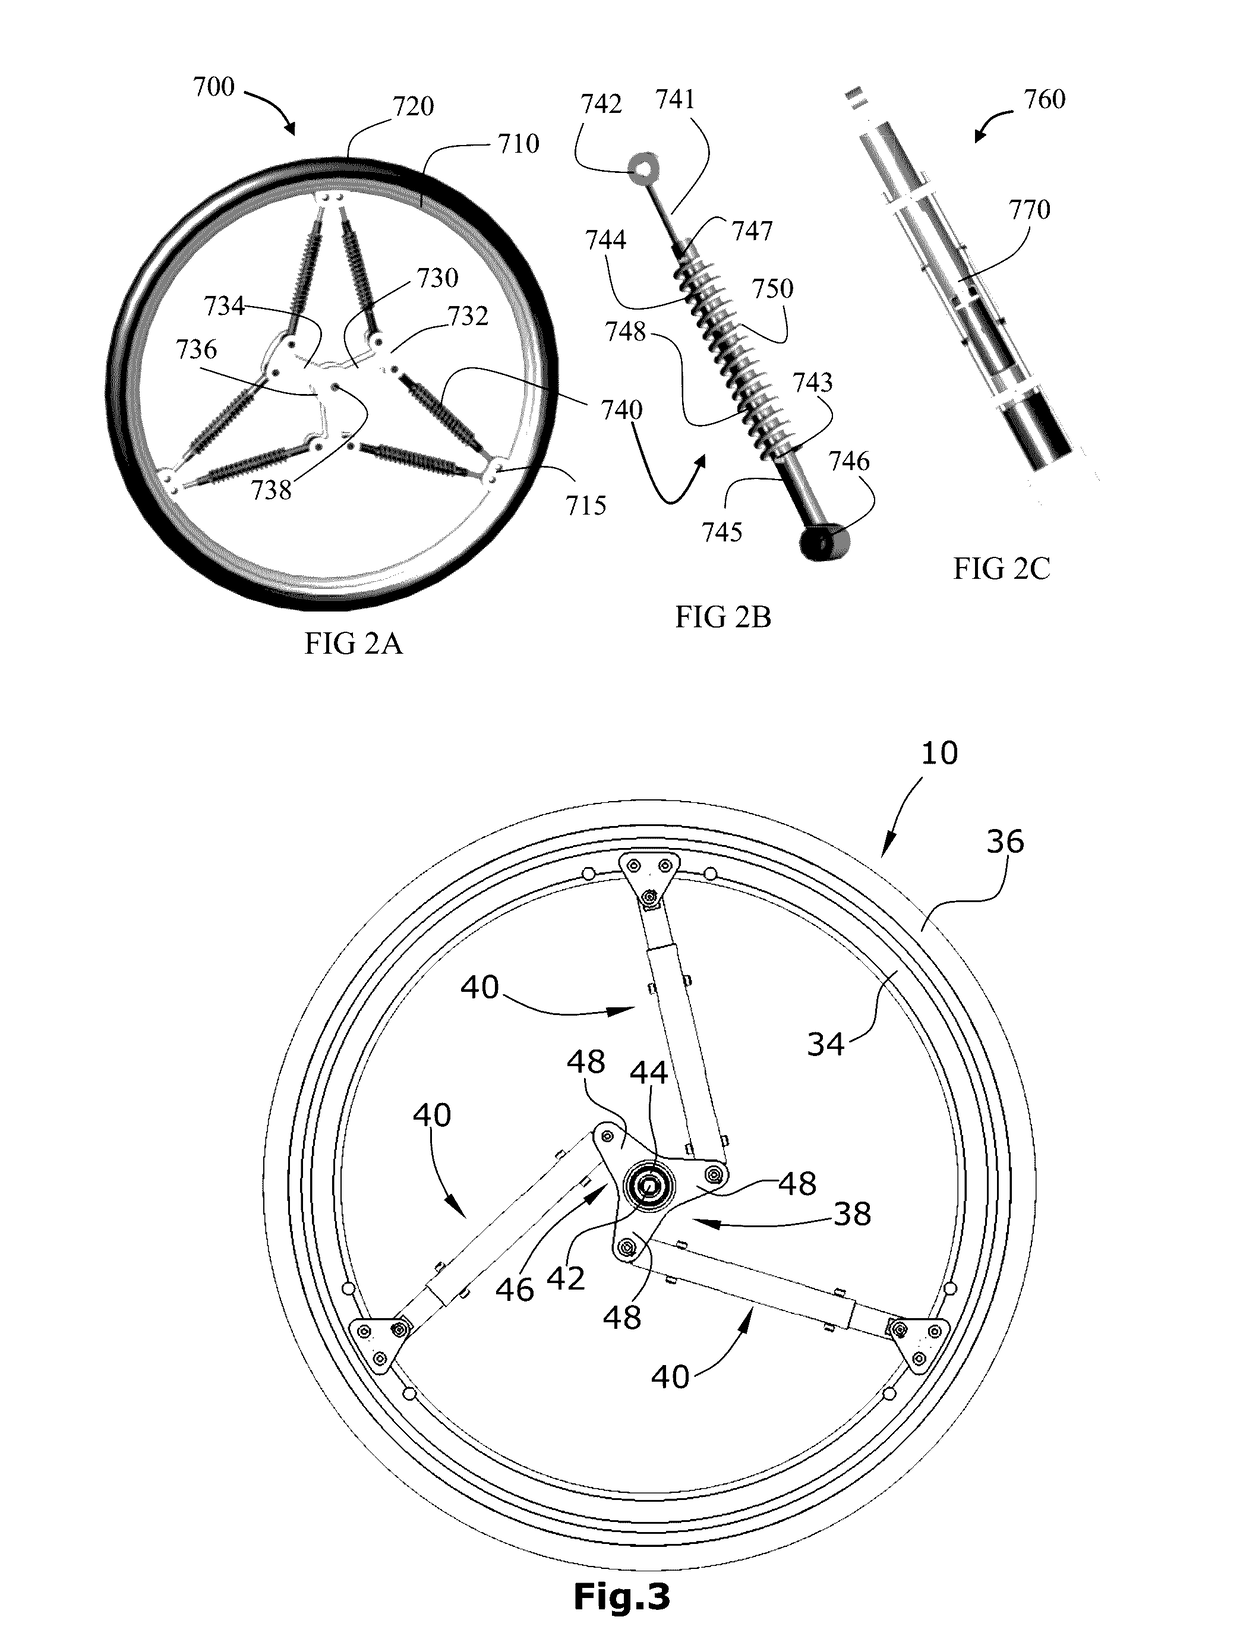 Wheel with suspension system